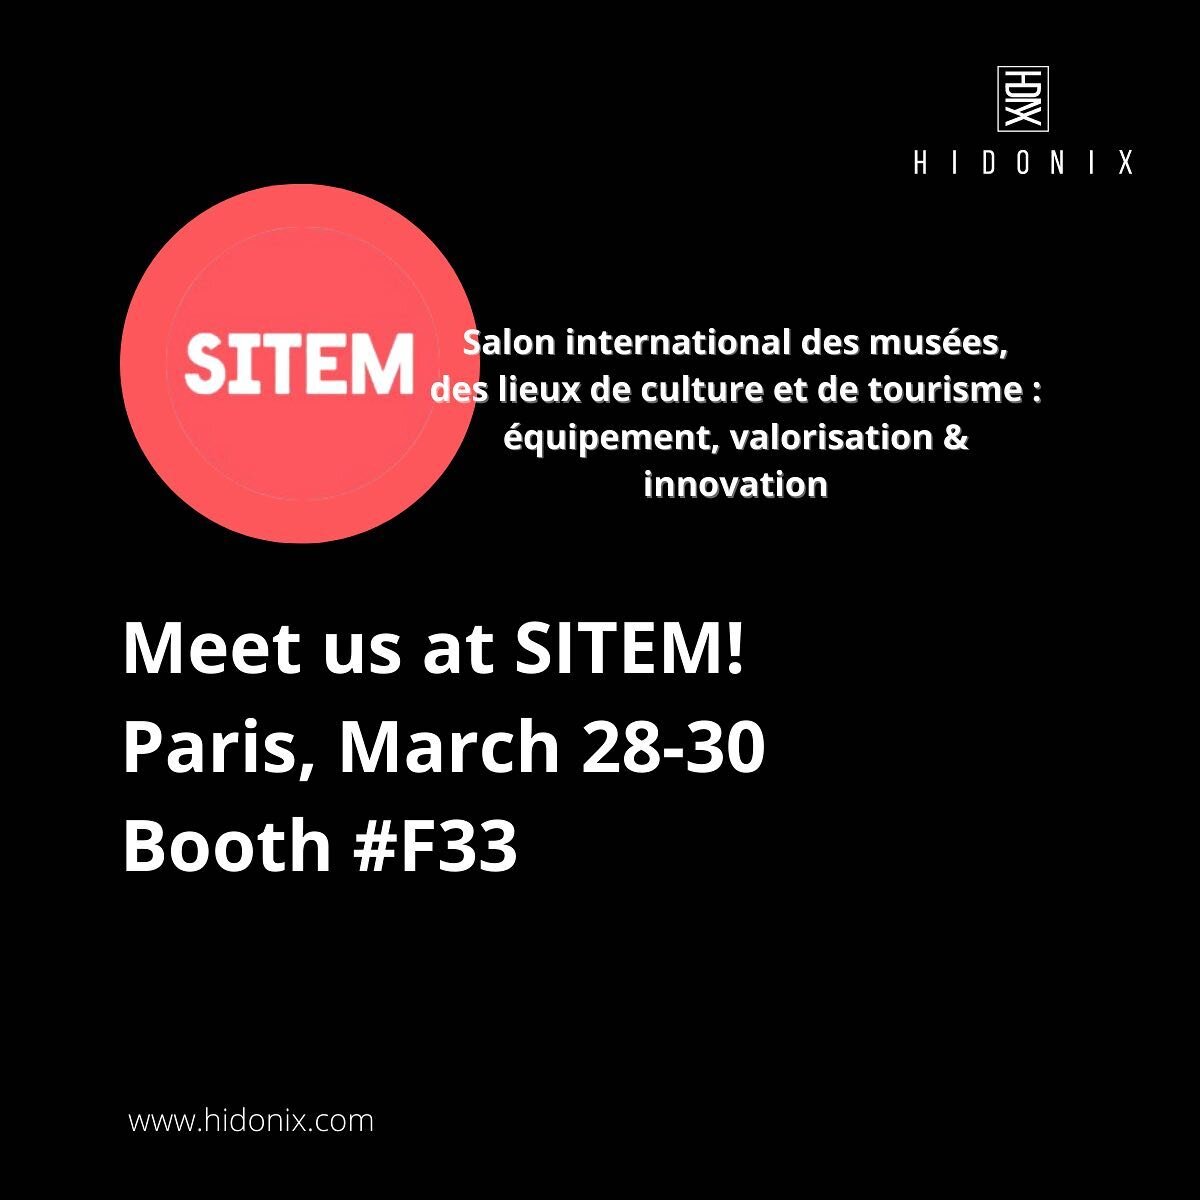 Be sure to stop by and say hello to our team members at SITEM!
This year&rsquo;s event will take place at Carrousel du Louvre in Paris from March 28th to 30th.
We can&rsquo;t wait to see you there!
-
#sitem #museums #museumlover #tradeshow #networkin